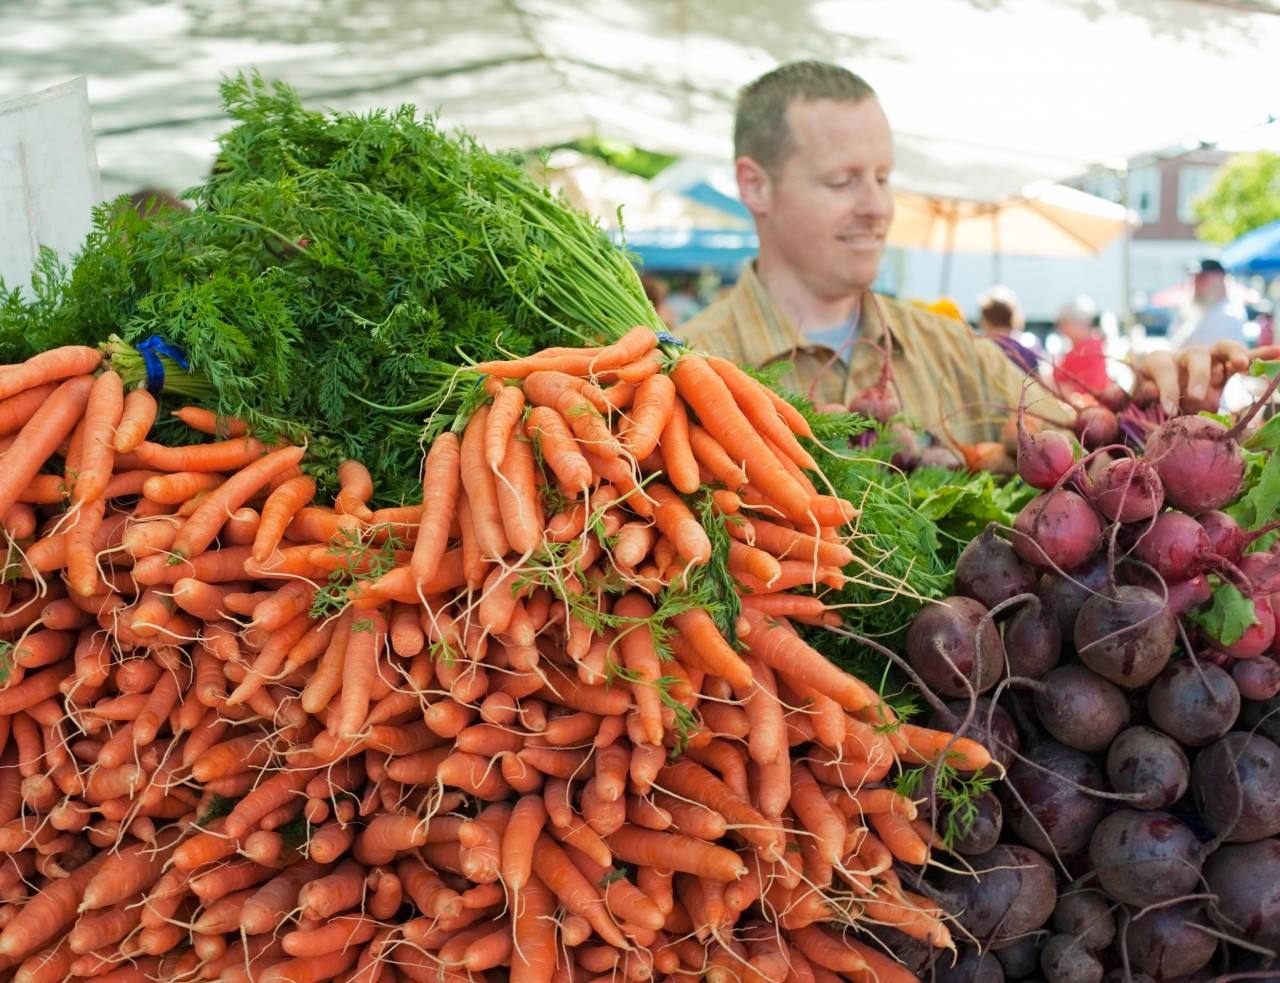 Locally grown organic produce at farmers' market --- Image by © Helen King/Corbis